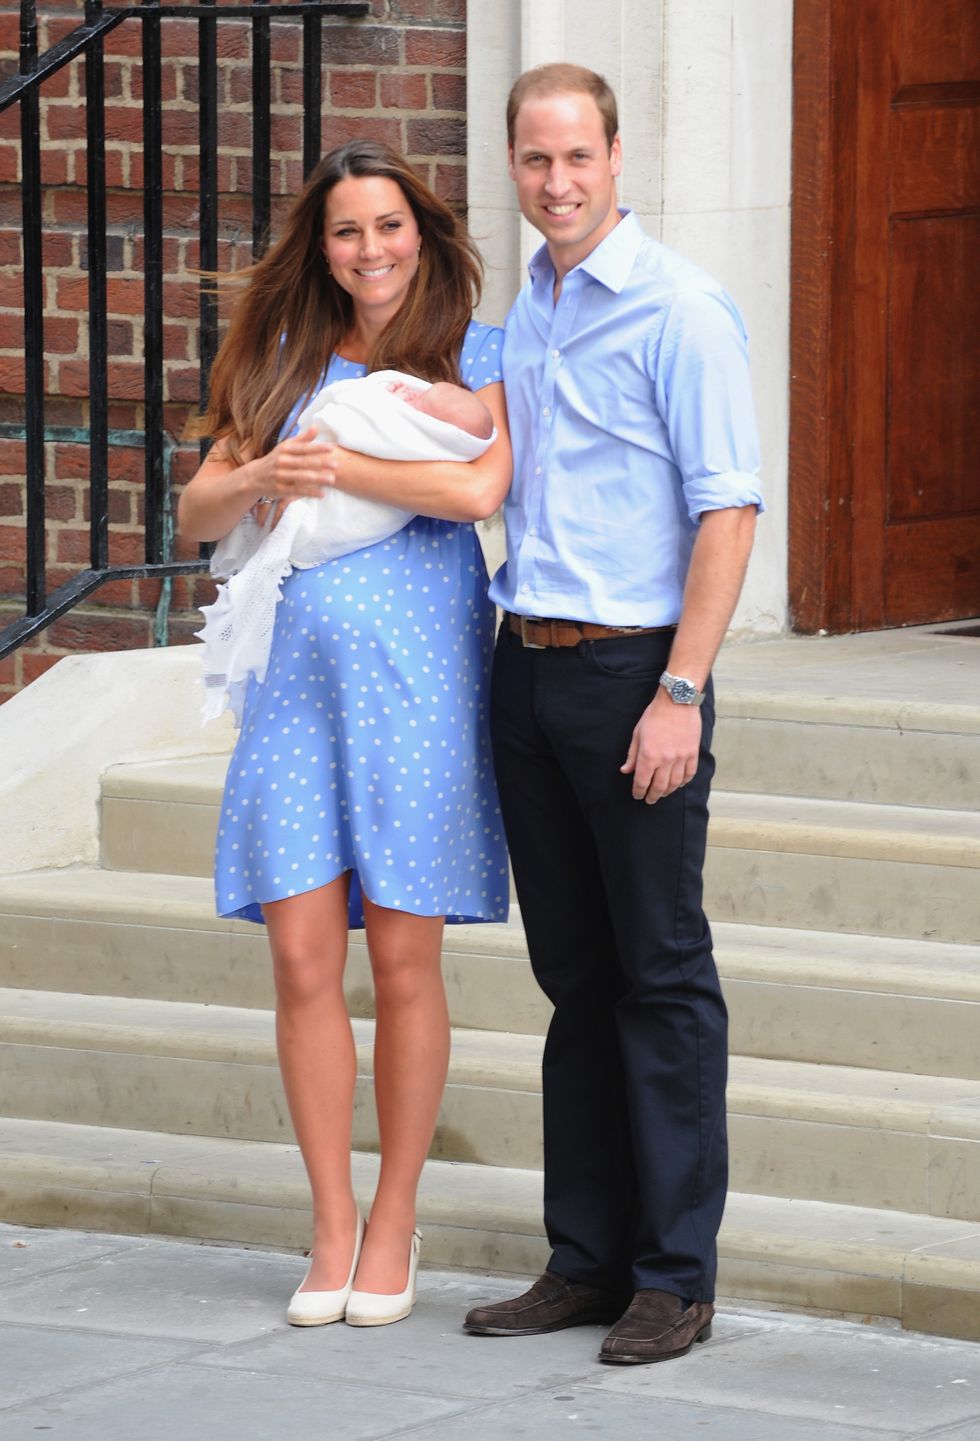 The Duke and Duchess pictured with Prince George in July 2013.